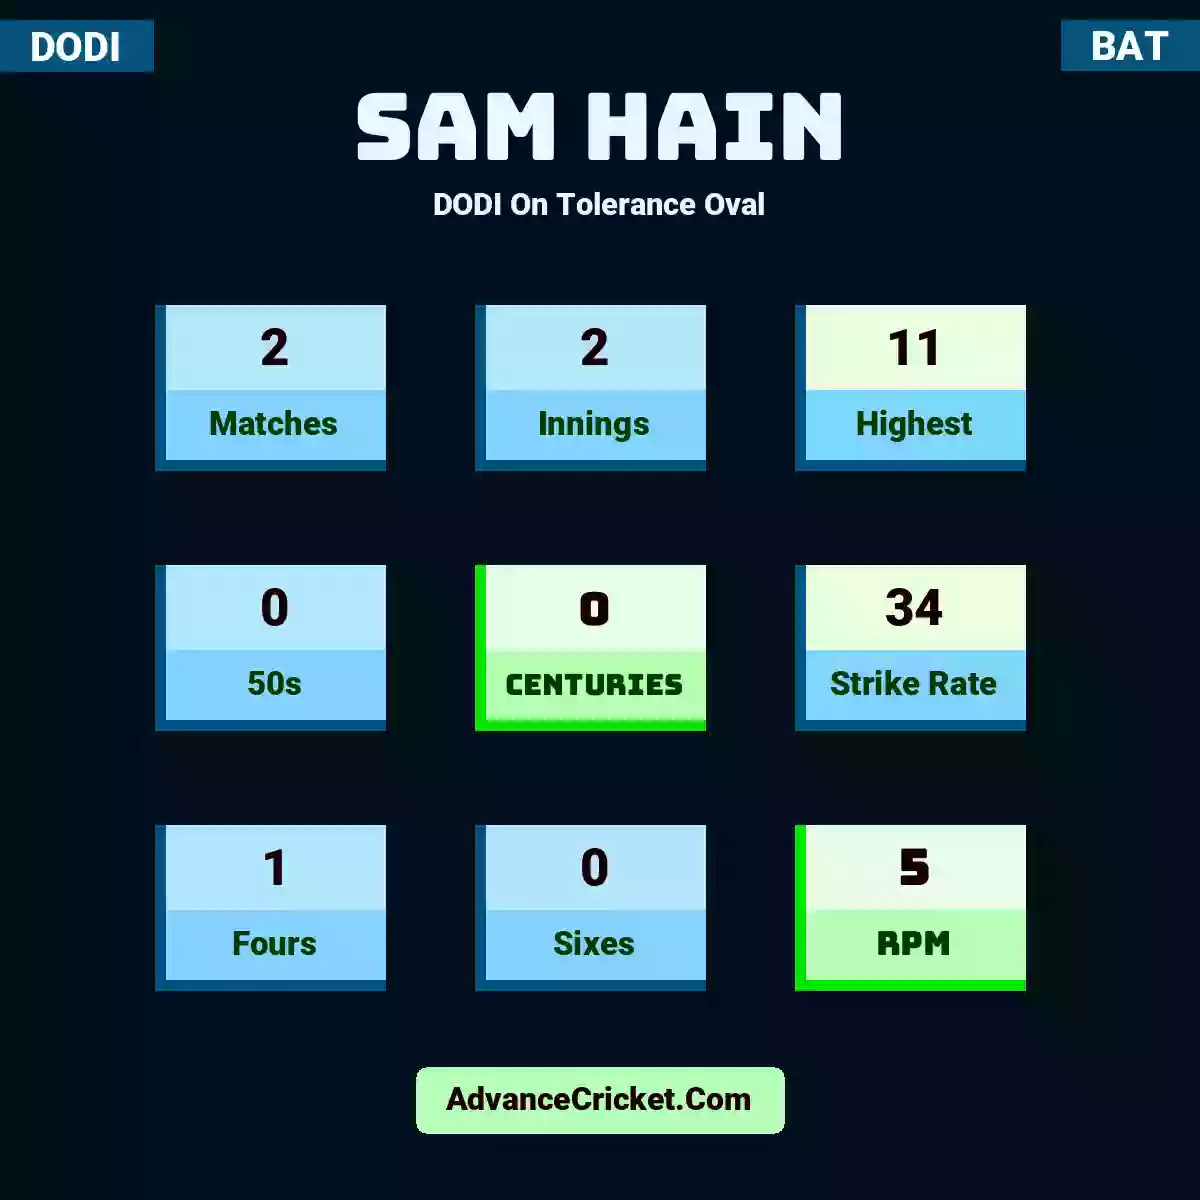 Sam Hain DODI  On Tolerance Oval, Sam Hain played 2 matches, scored 11 runs as highest, 0 half-centuries, and 0 centuries, with a strike rate of 34. S.Hain hit 1 fours and 0 sixes, with an RPM of 5.